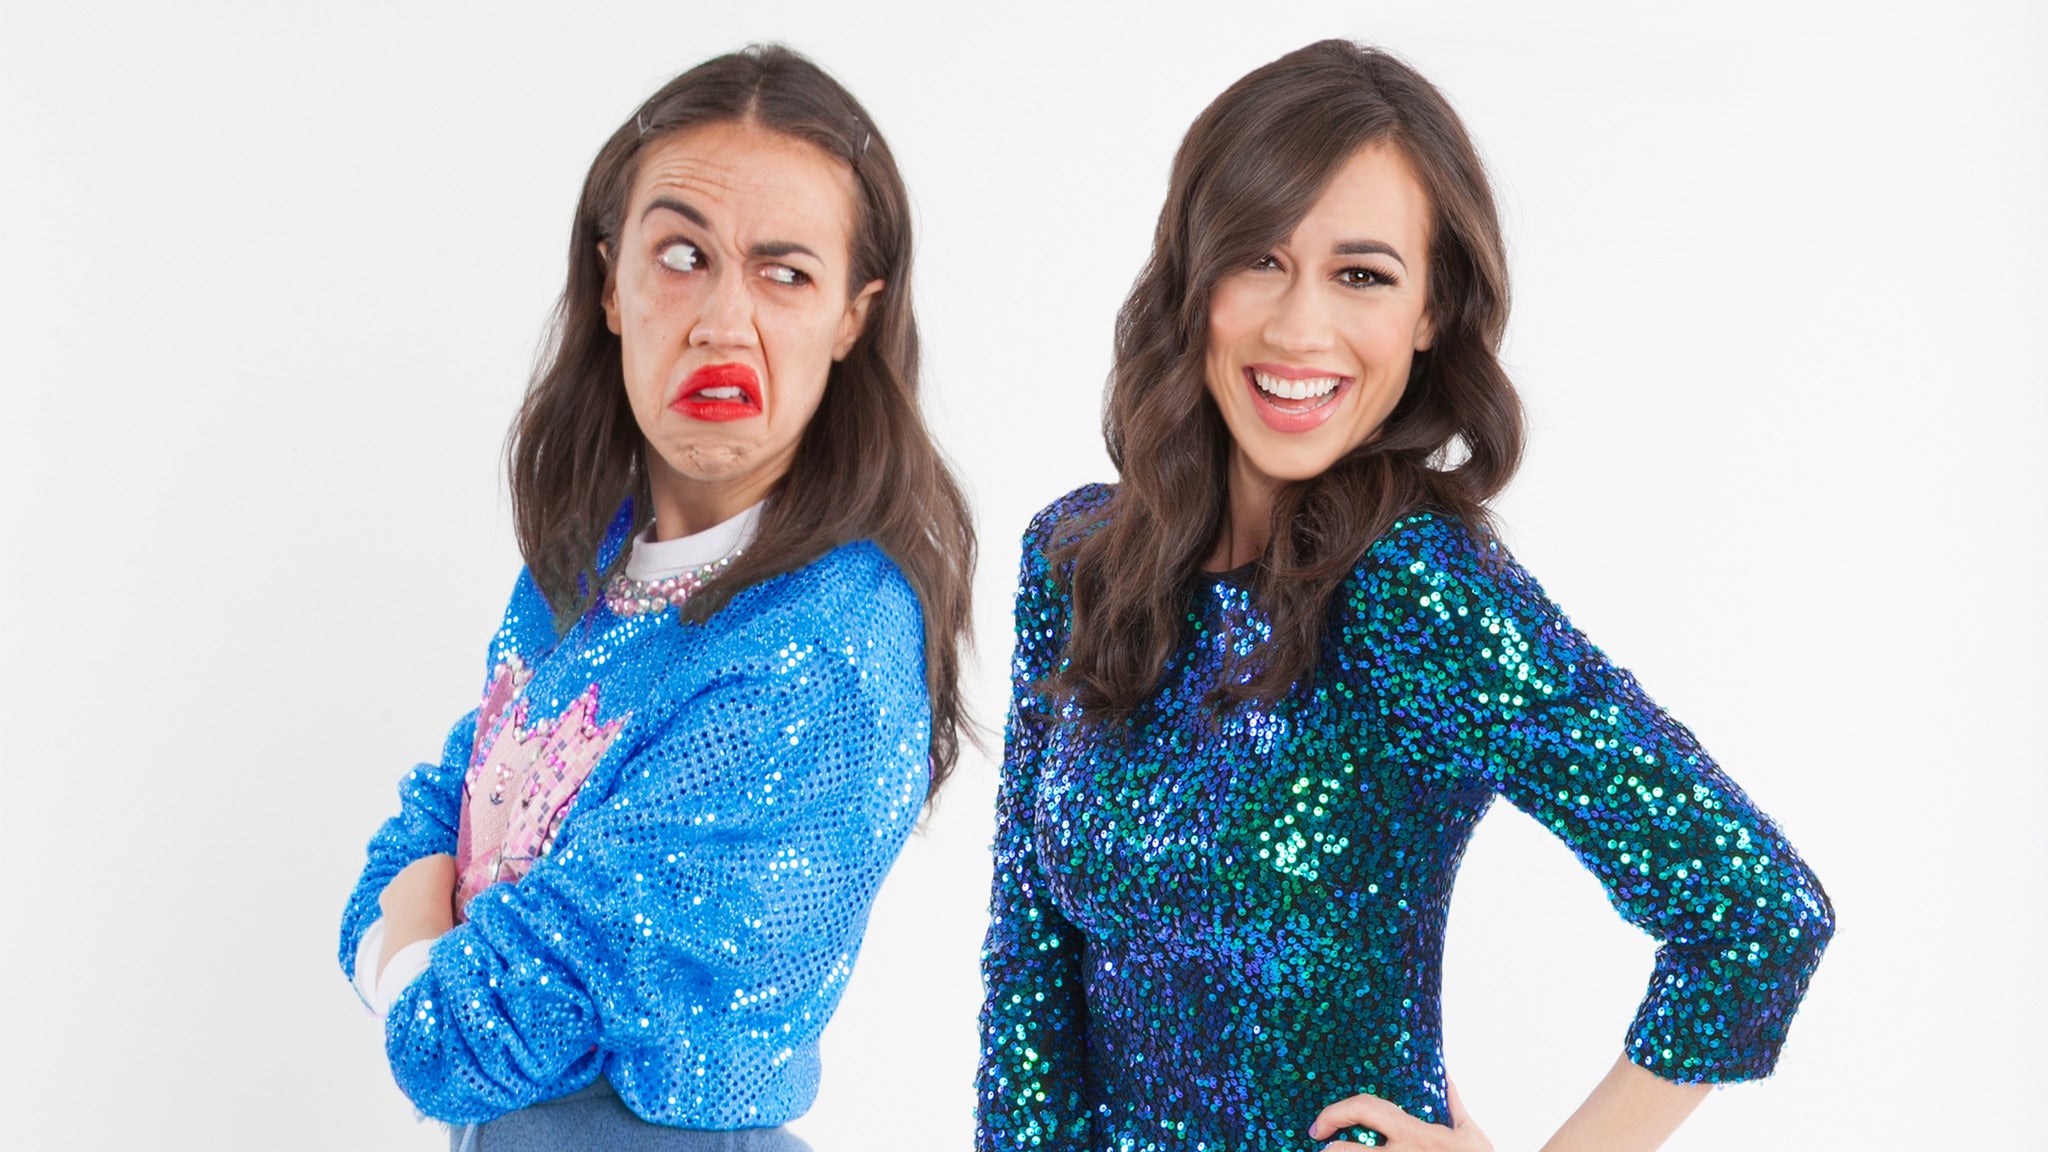 Miranda Sings in New Orleans promo photo for American Express presale offer code